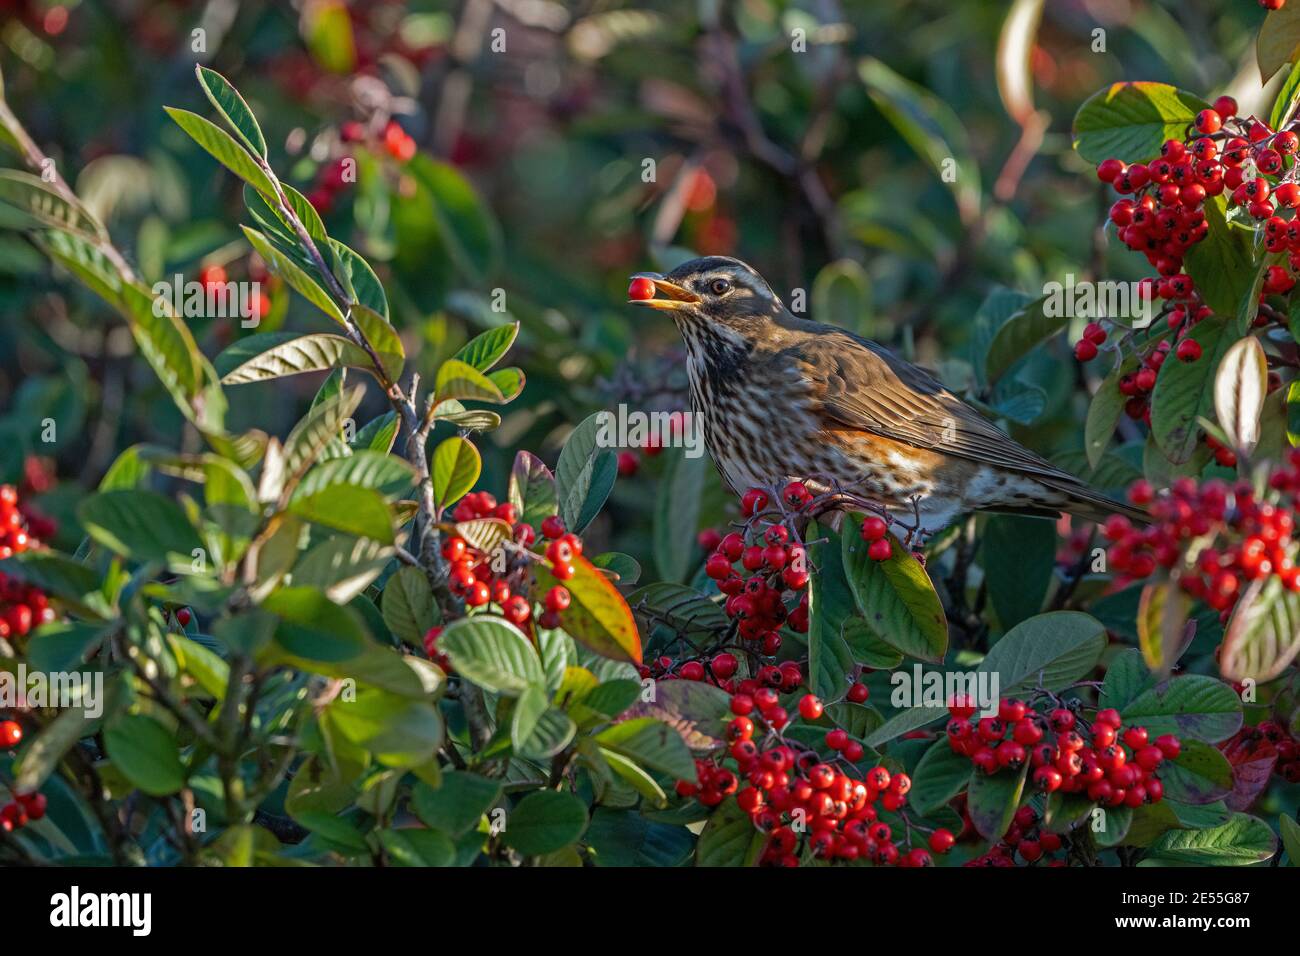 Redwing-Turdus iliacus feeds on red winter berries. Stock Photo